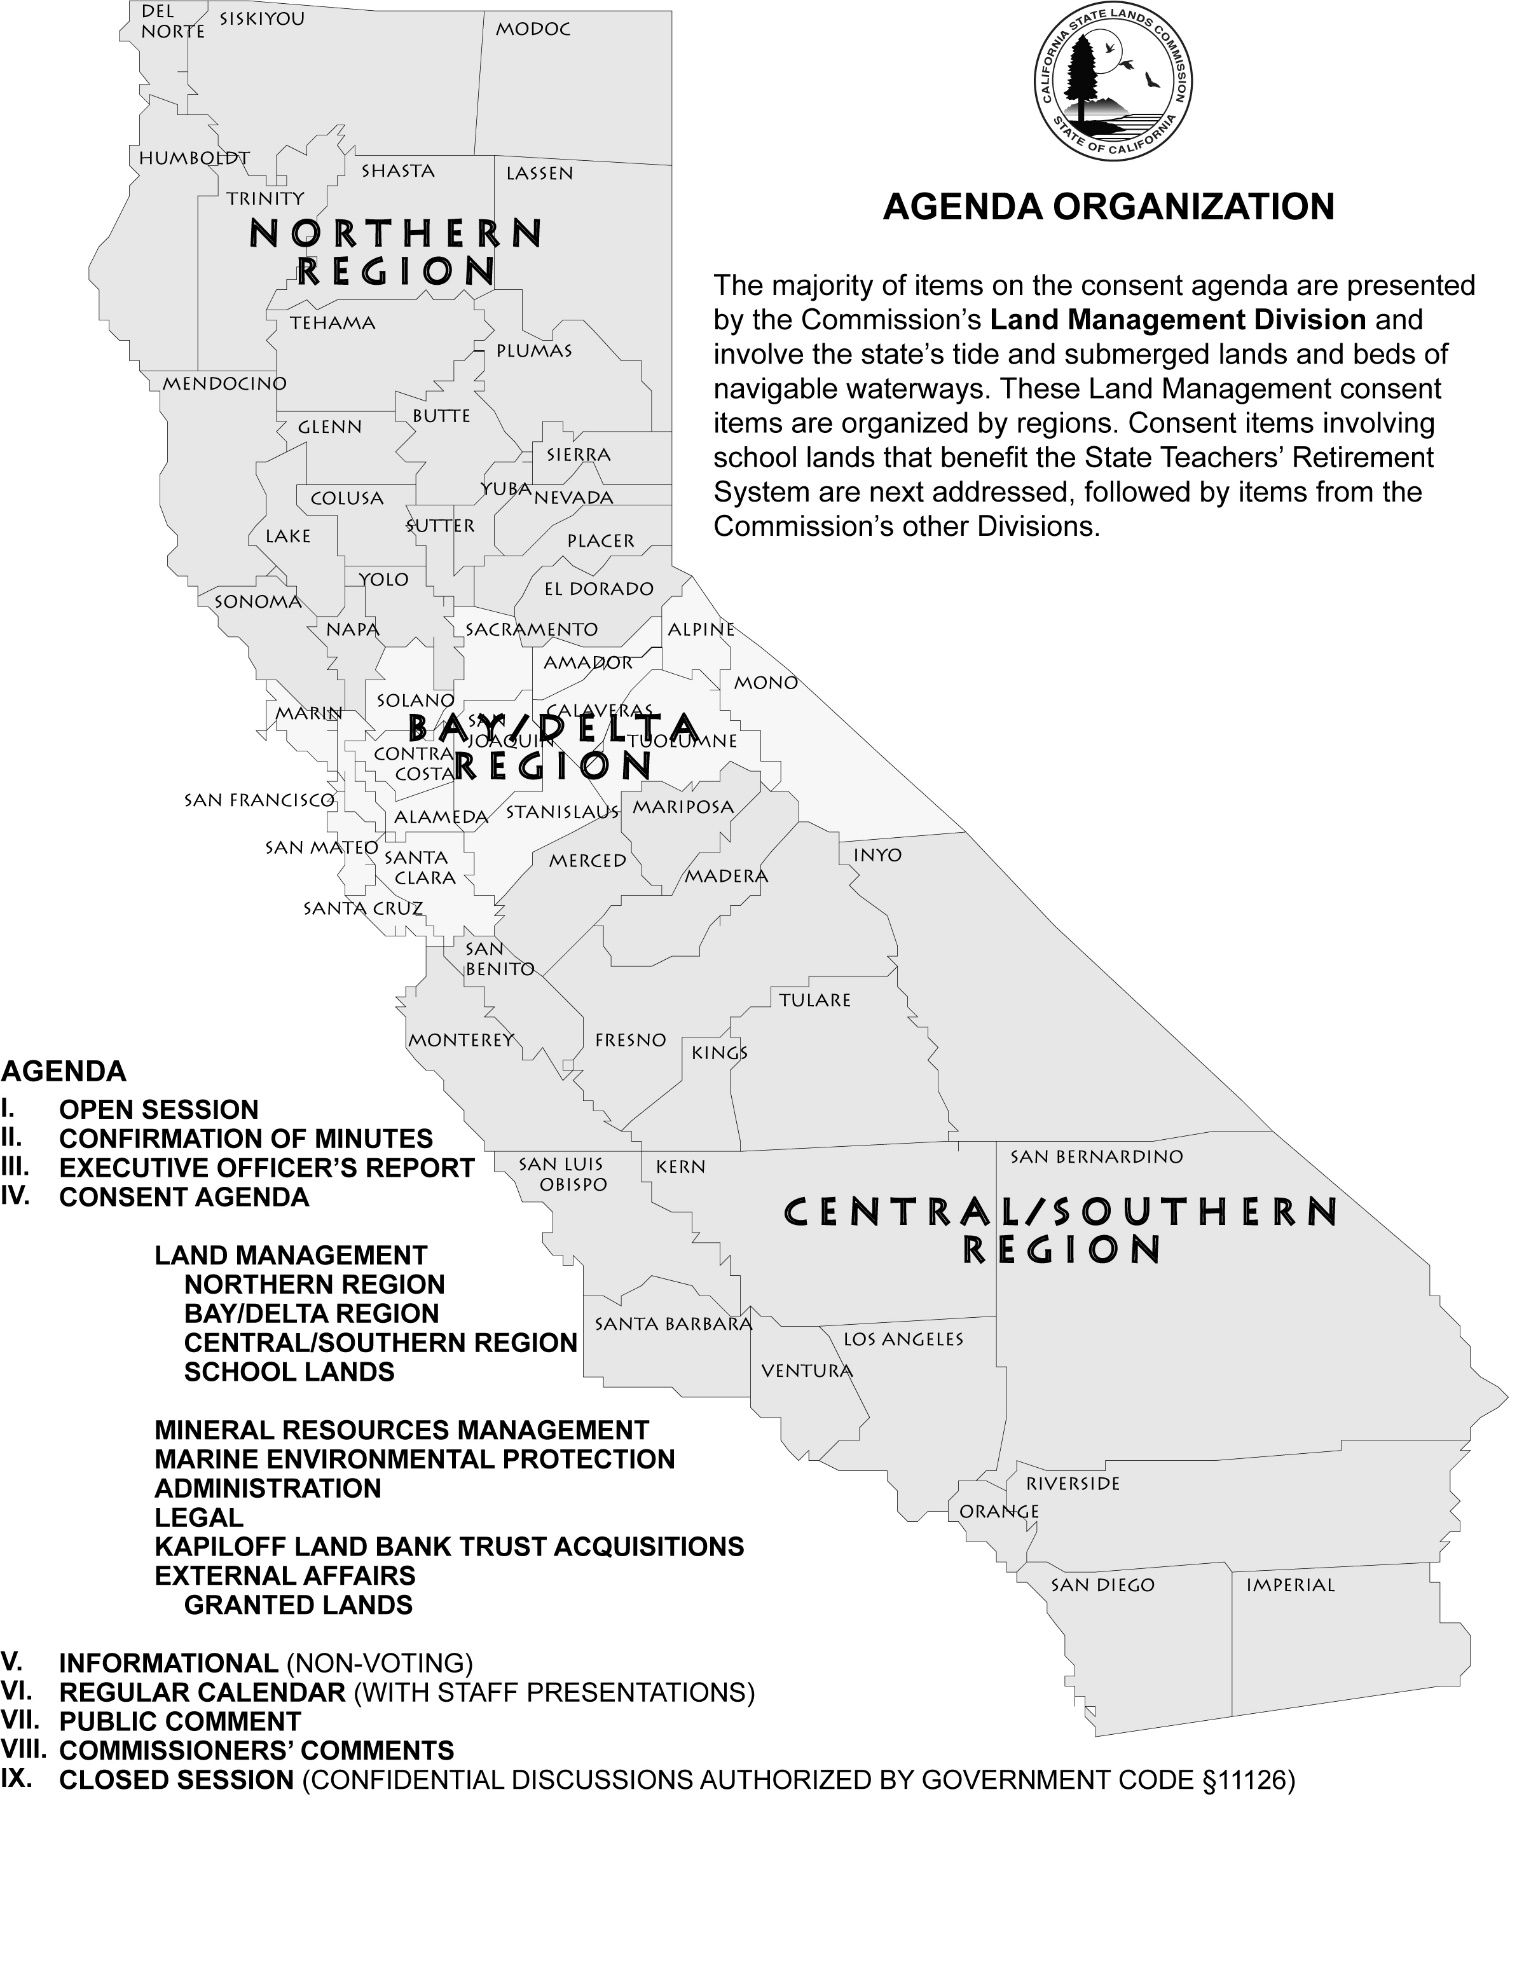 Image of a regional map of the State of CA with an outline of the meeting agenda printed beside it.